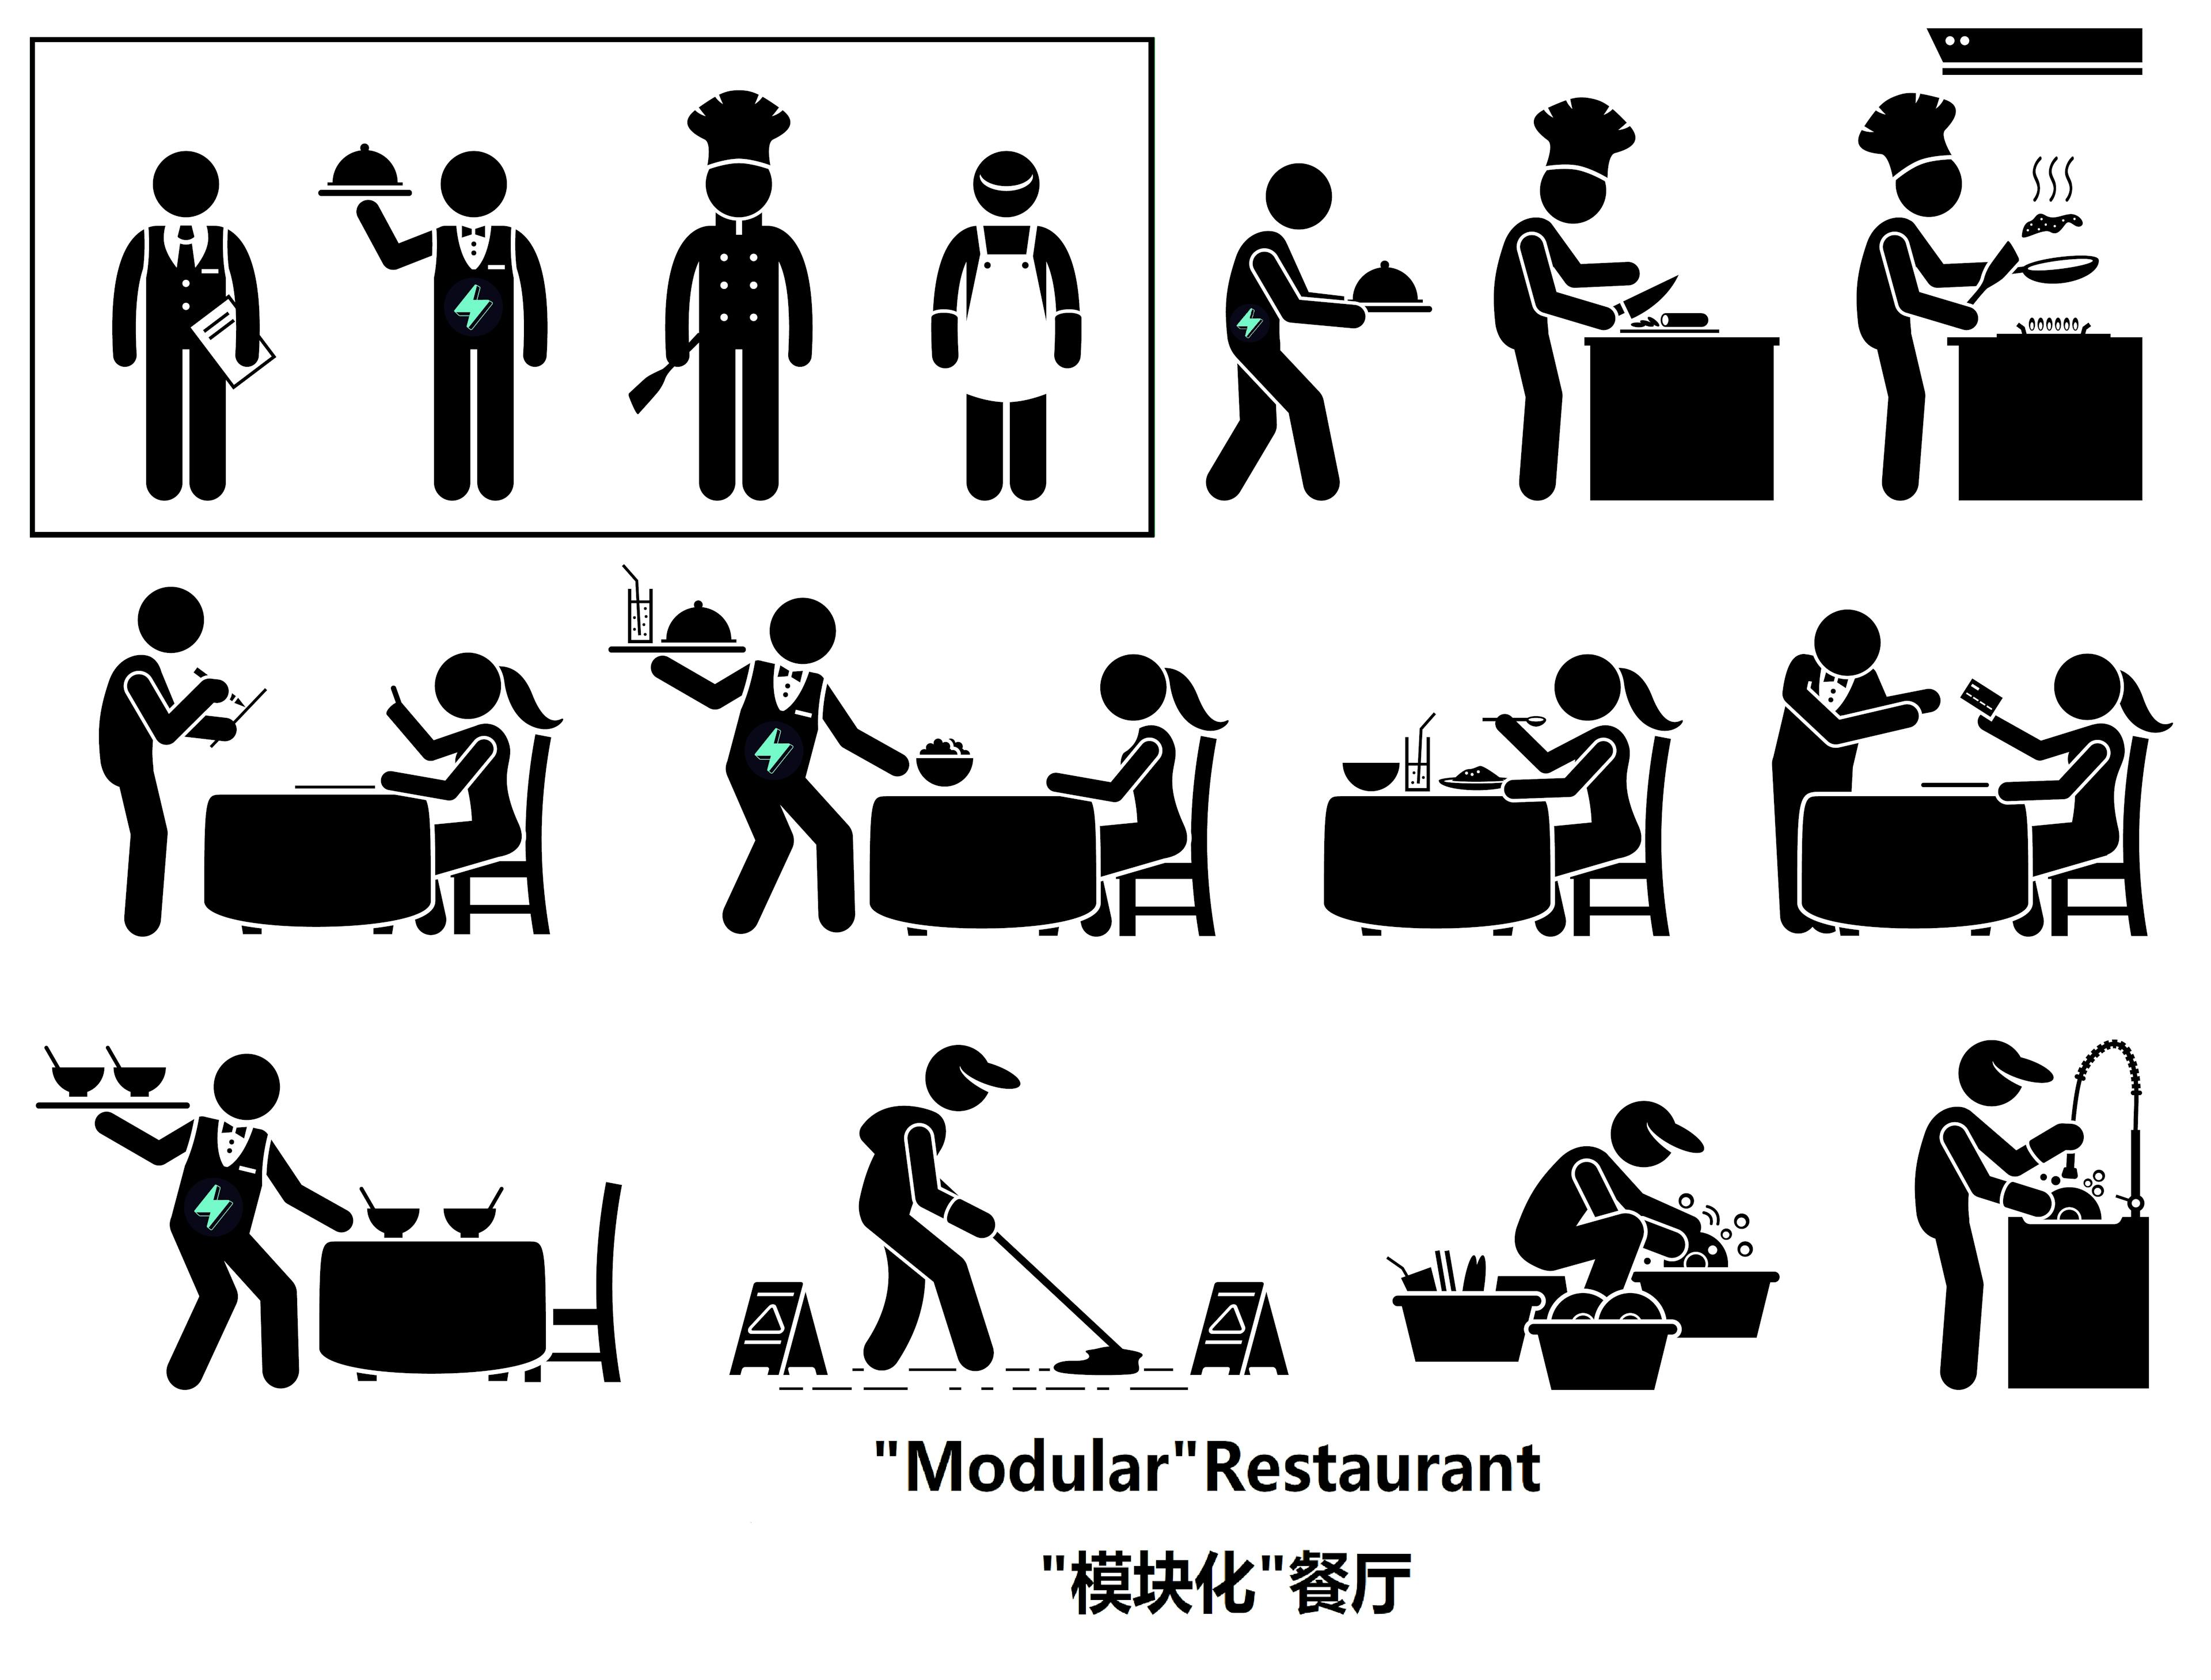 Sufficient "Staff", division of labor and cooperation, fast and orderly